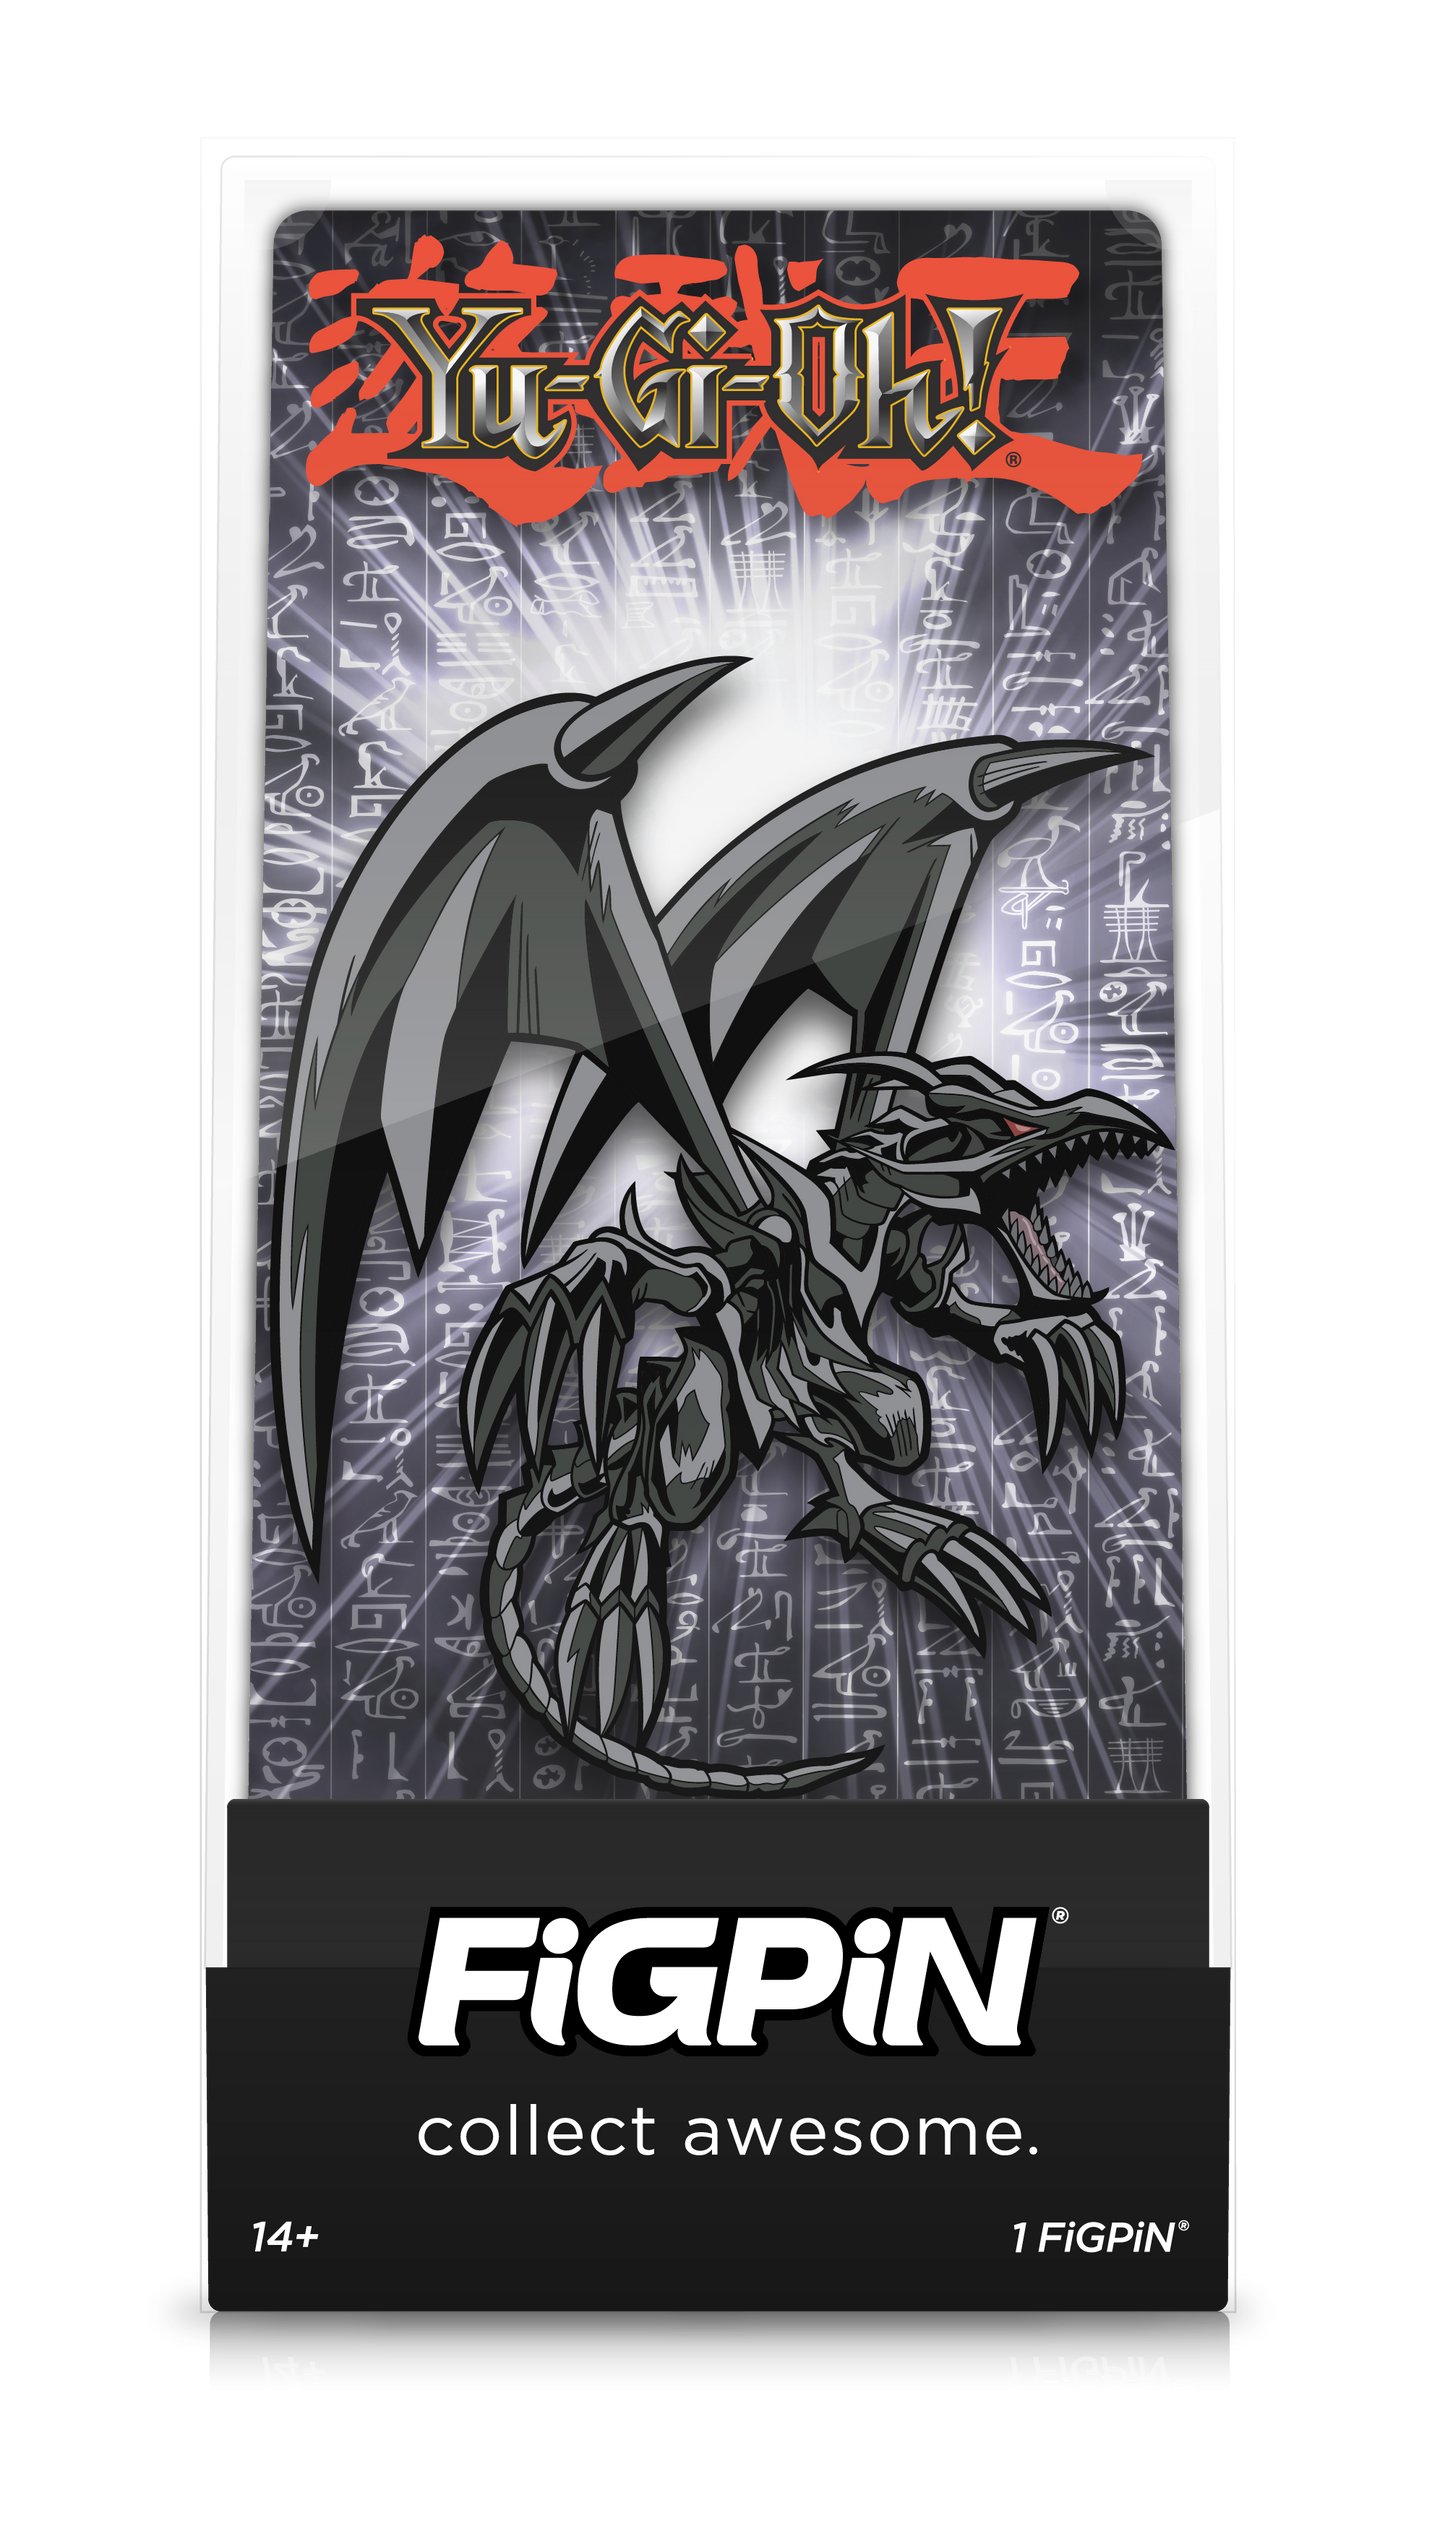 FiGPiN Yu-Gi-Oh! - Red-Eyes Black Dragon eVend LE 1500 Exclusive #1504